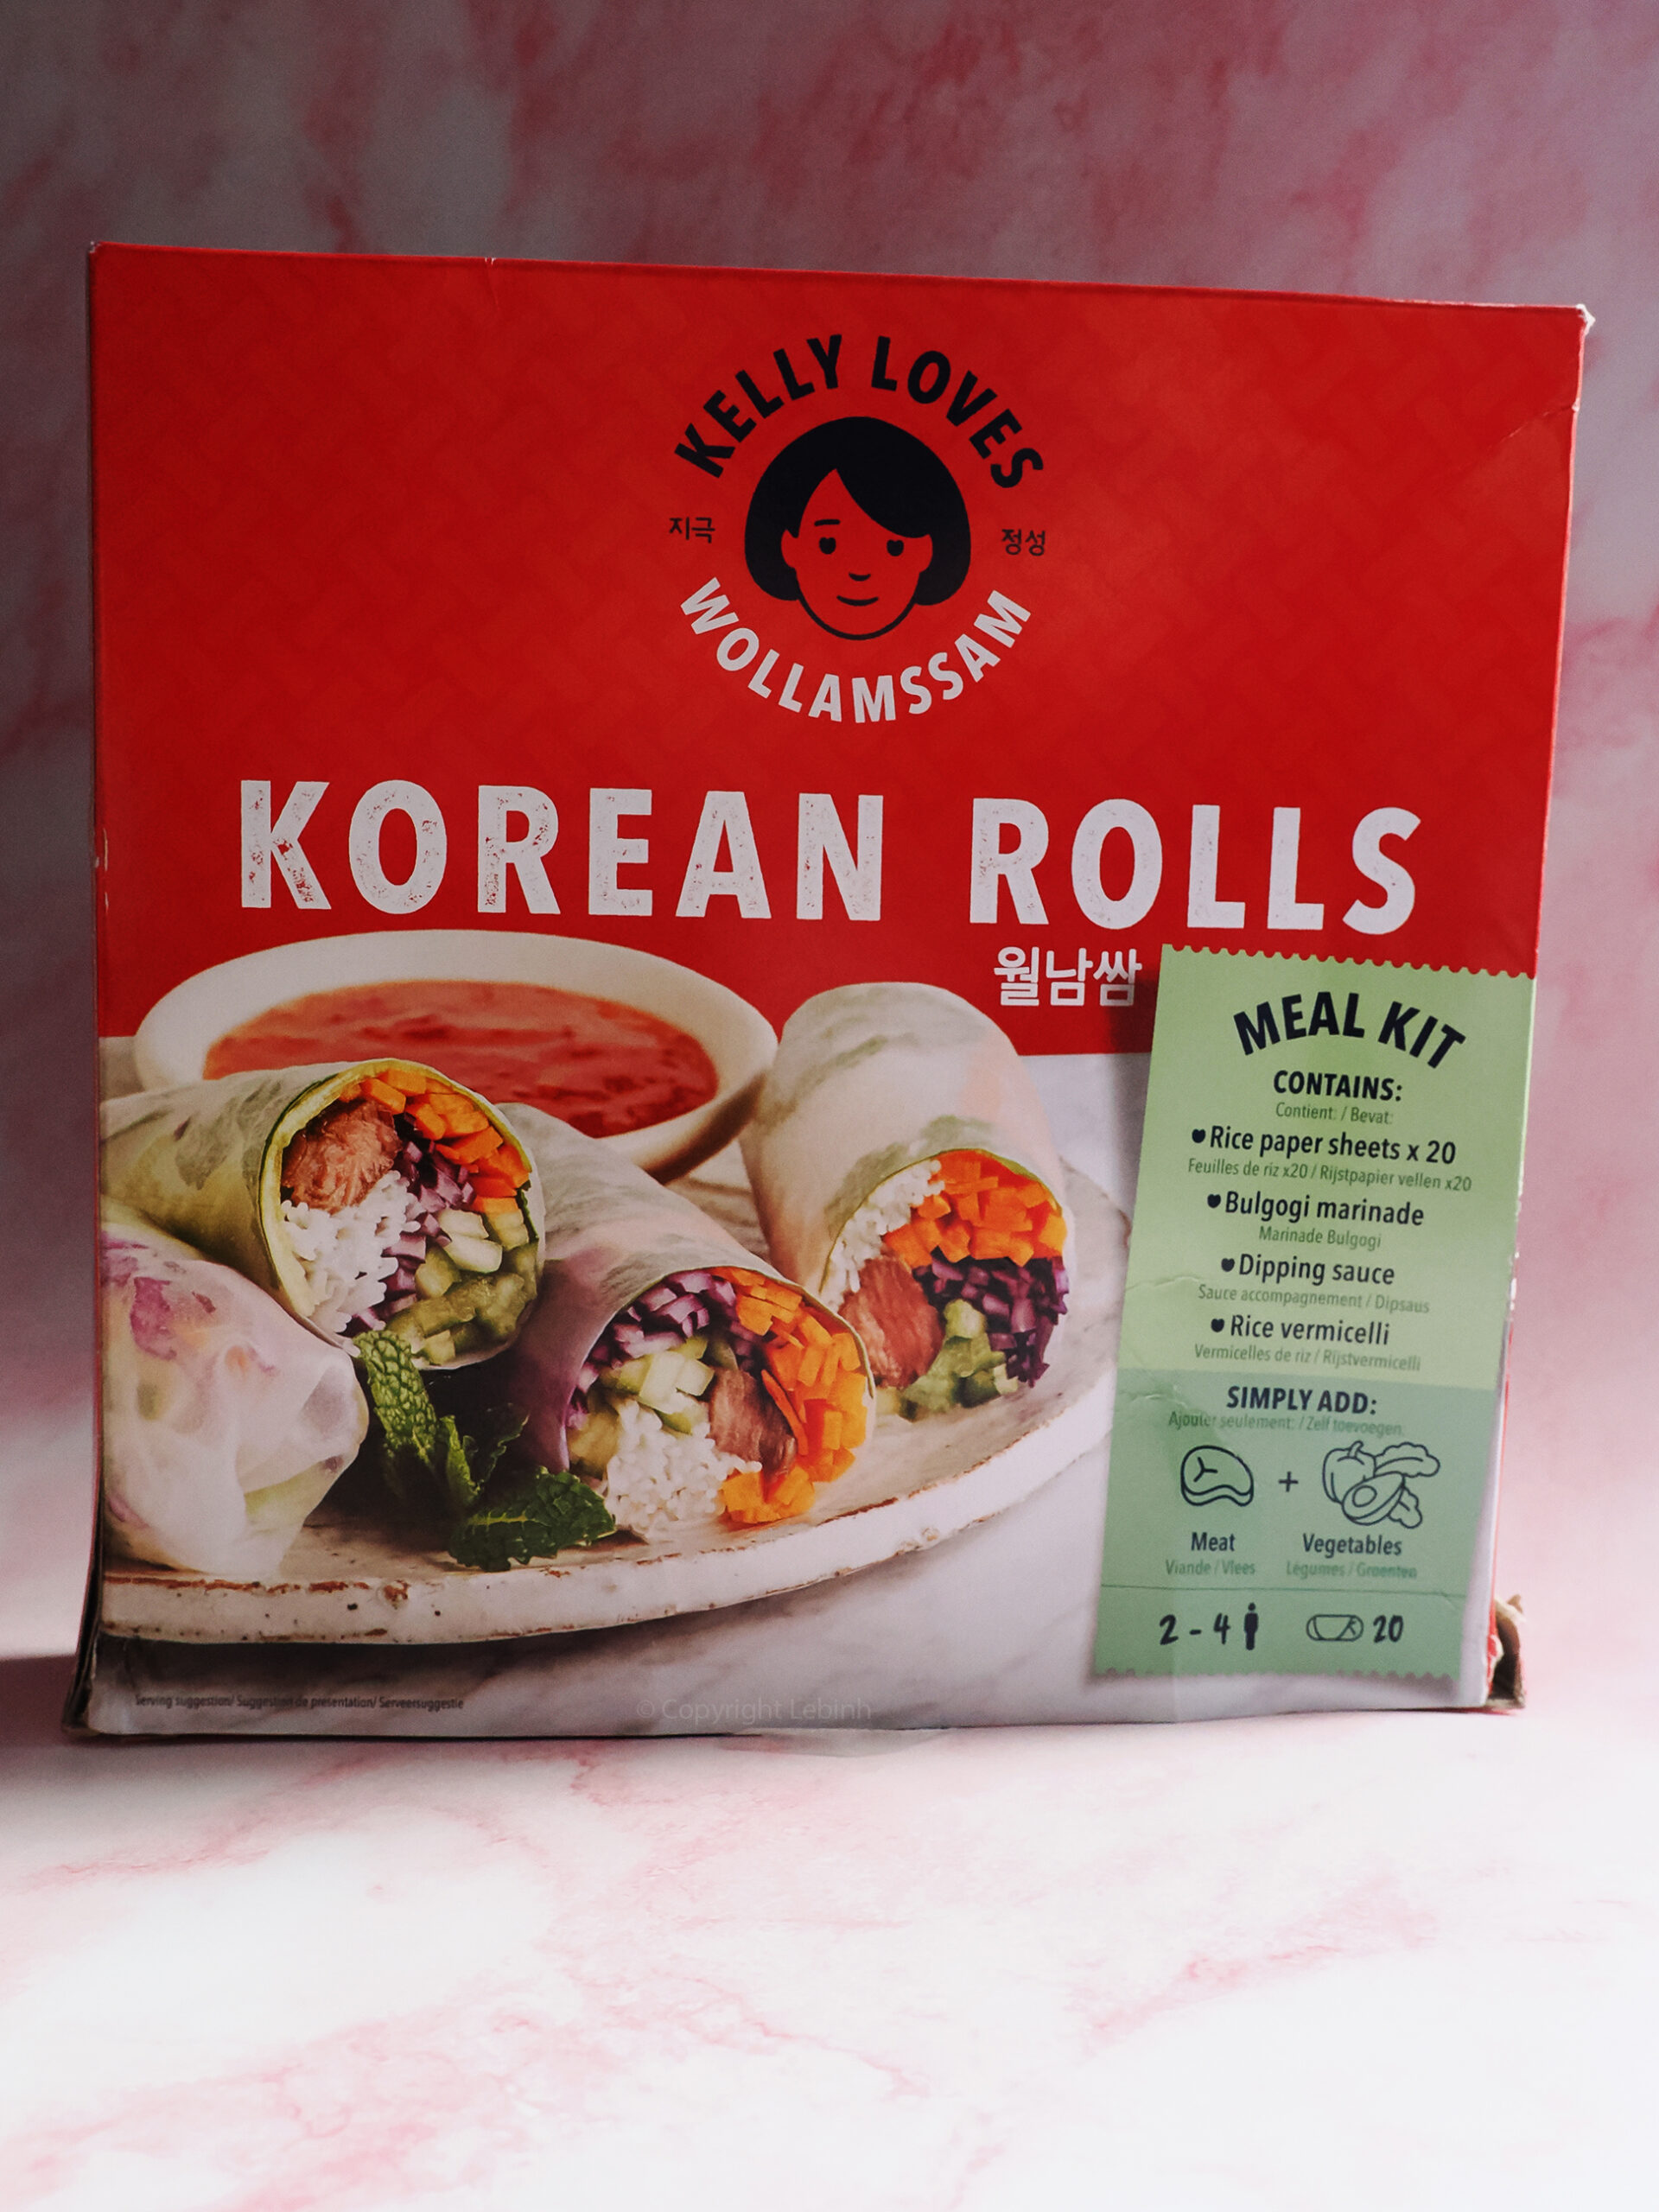 REVIEW: Kelly Loves Sushi at Home Making Kit - West Wales Family Life